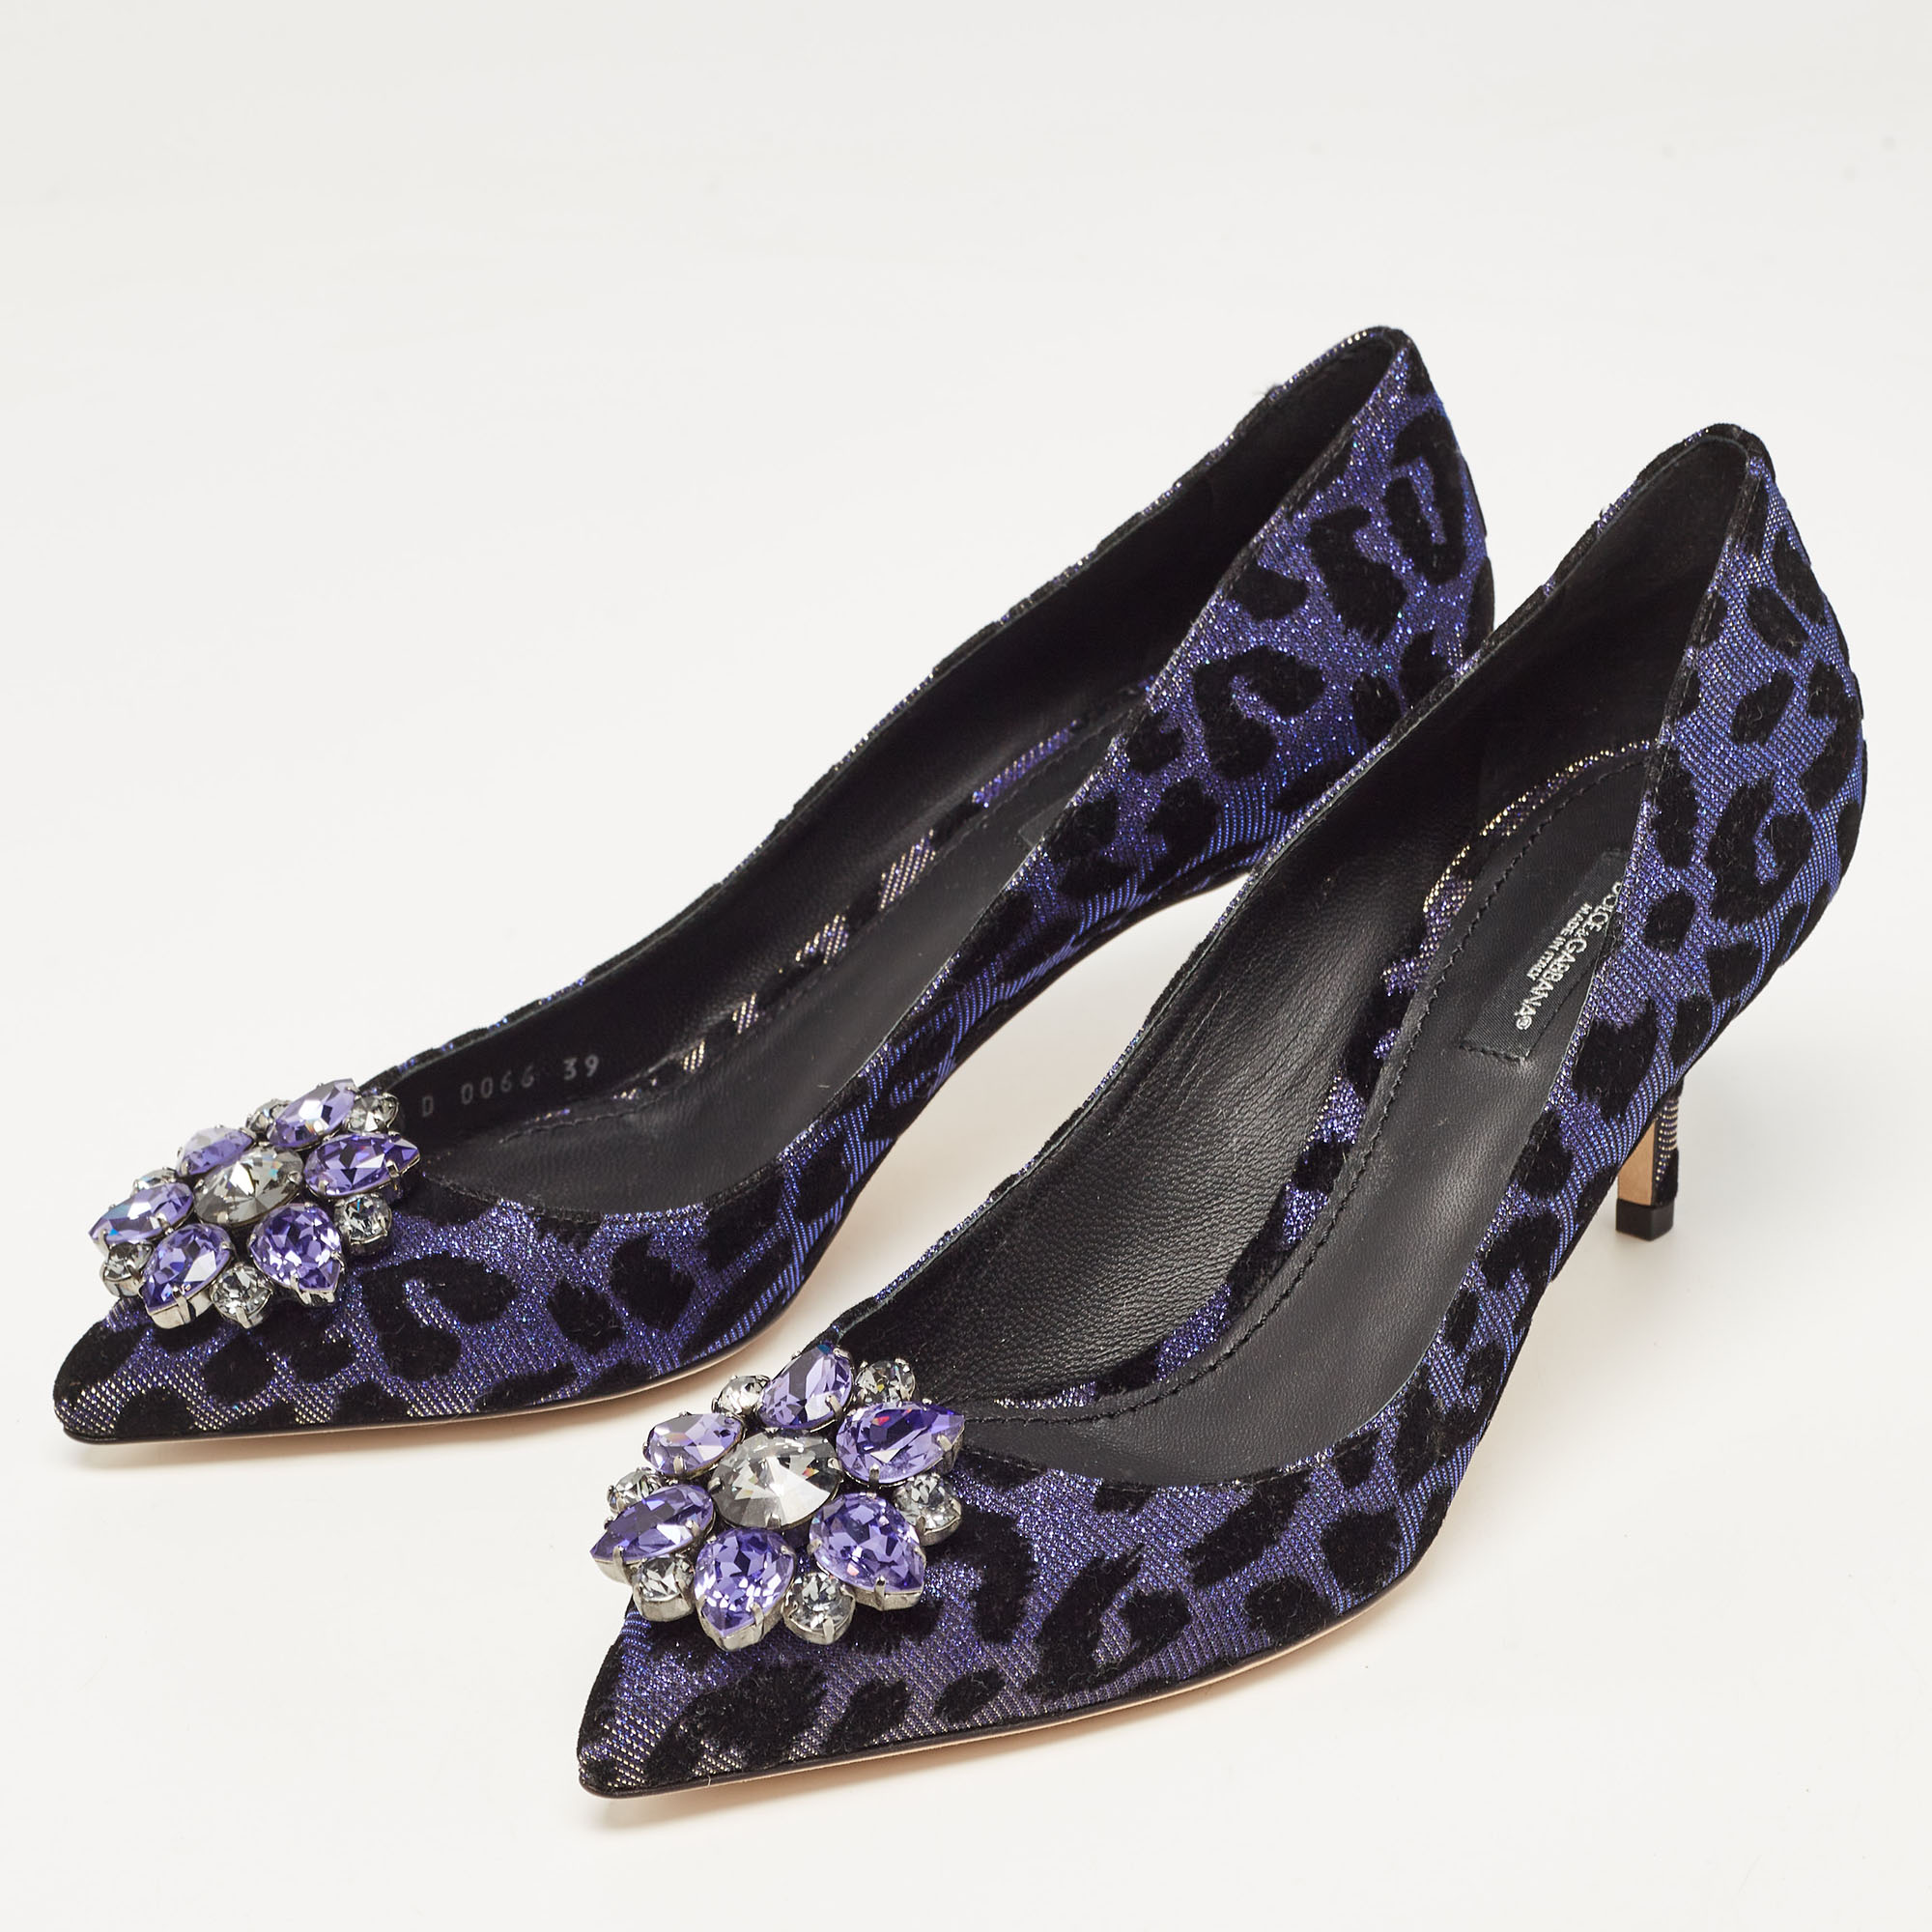 

Dolce & Gabbana Black/Purple Glitter Fabric Bellucci Crystal Embellished Pointed Toe Pumps Size